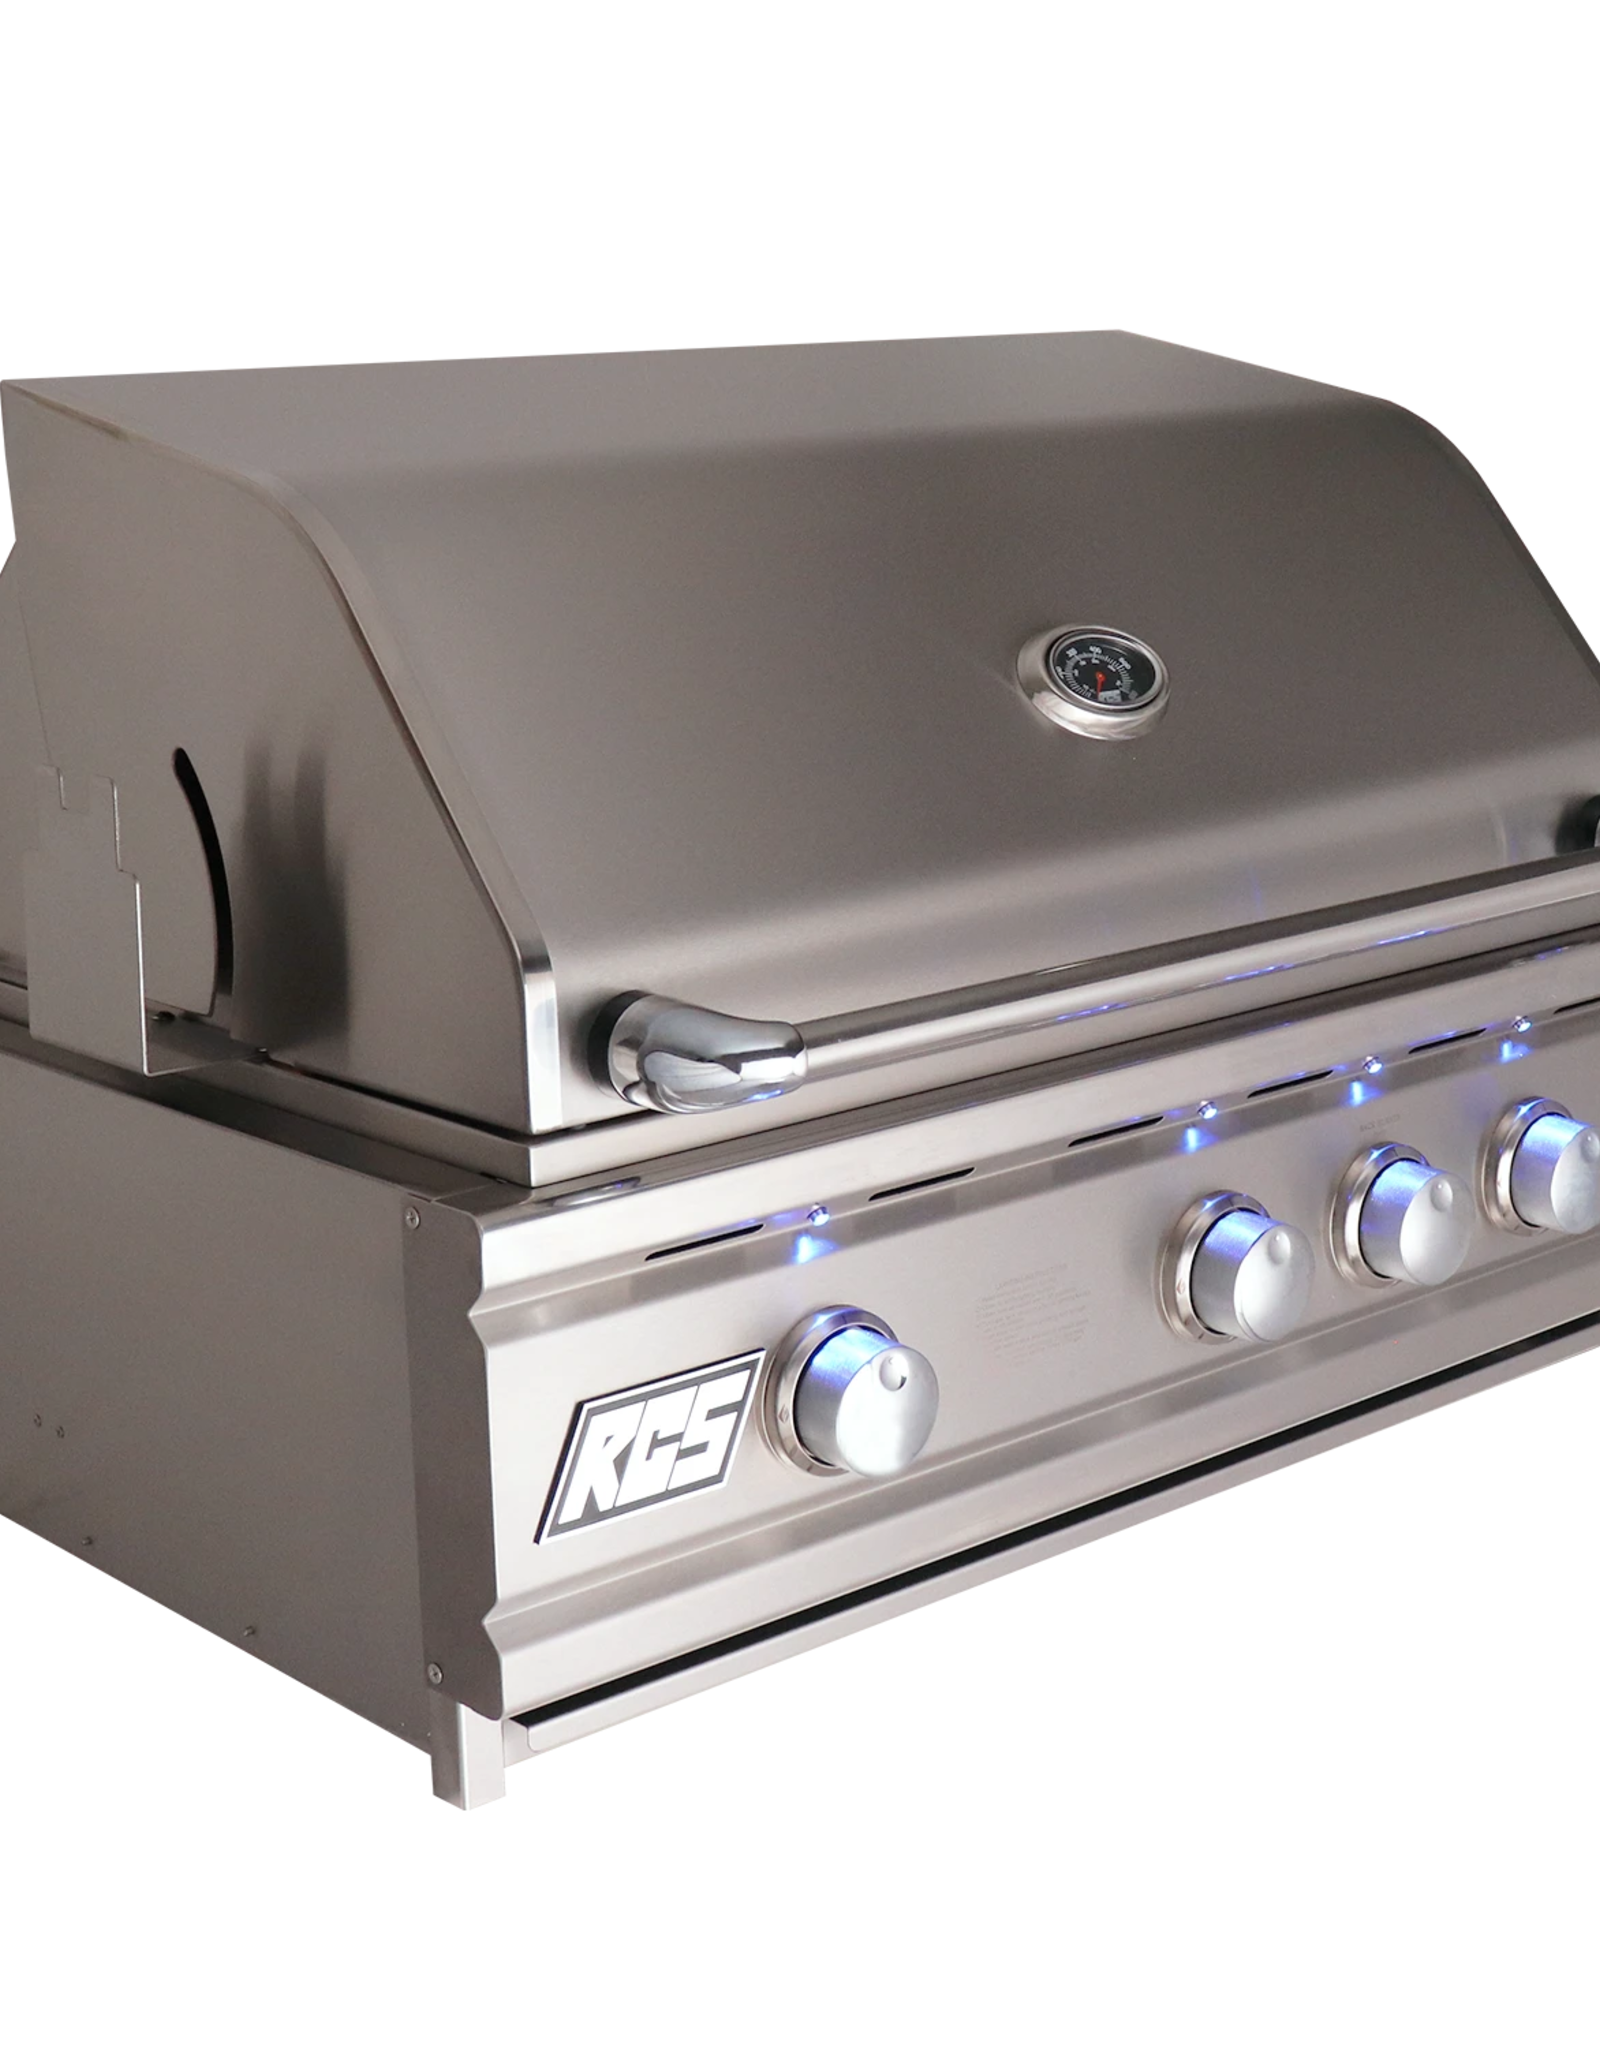 Renaissance Cooking Systems Renaissance Cooking Systems 30" Cutlass Pro Drop-In Grill - RON30A